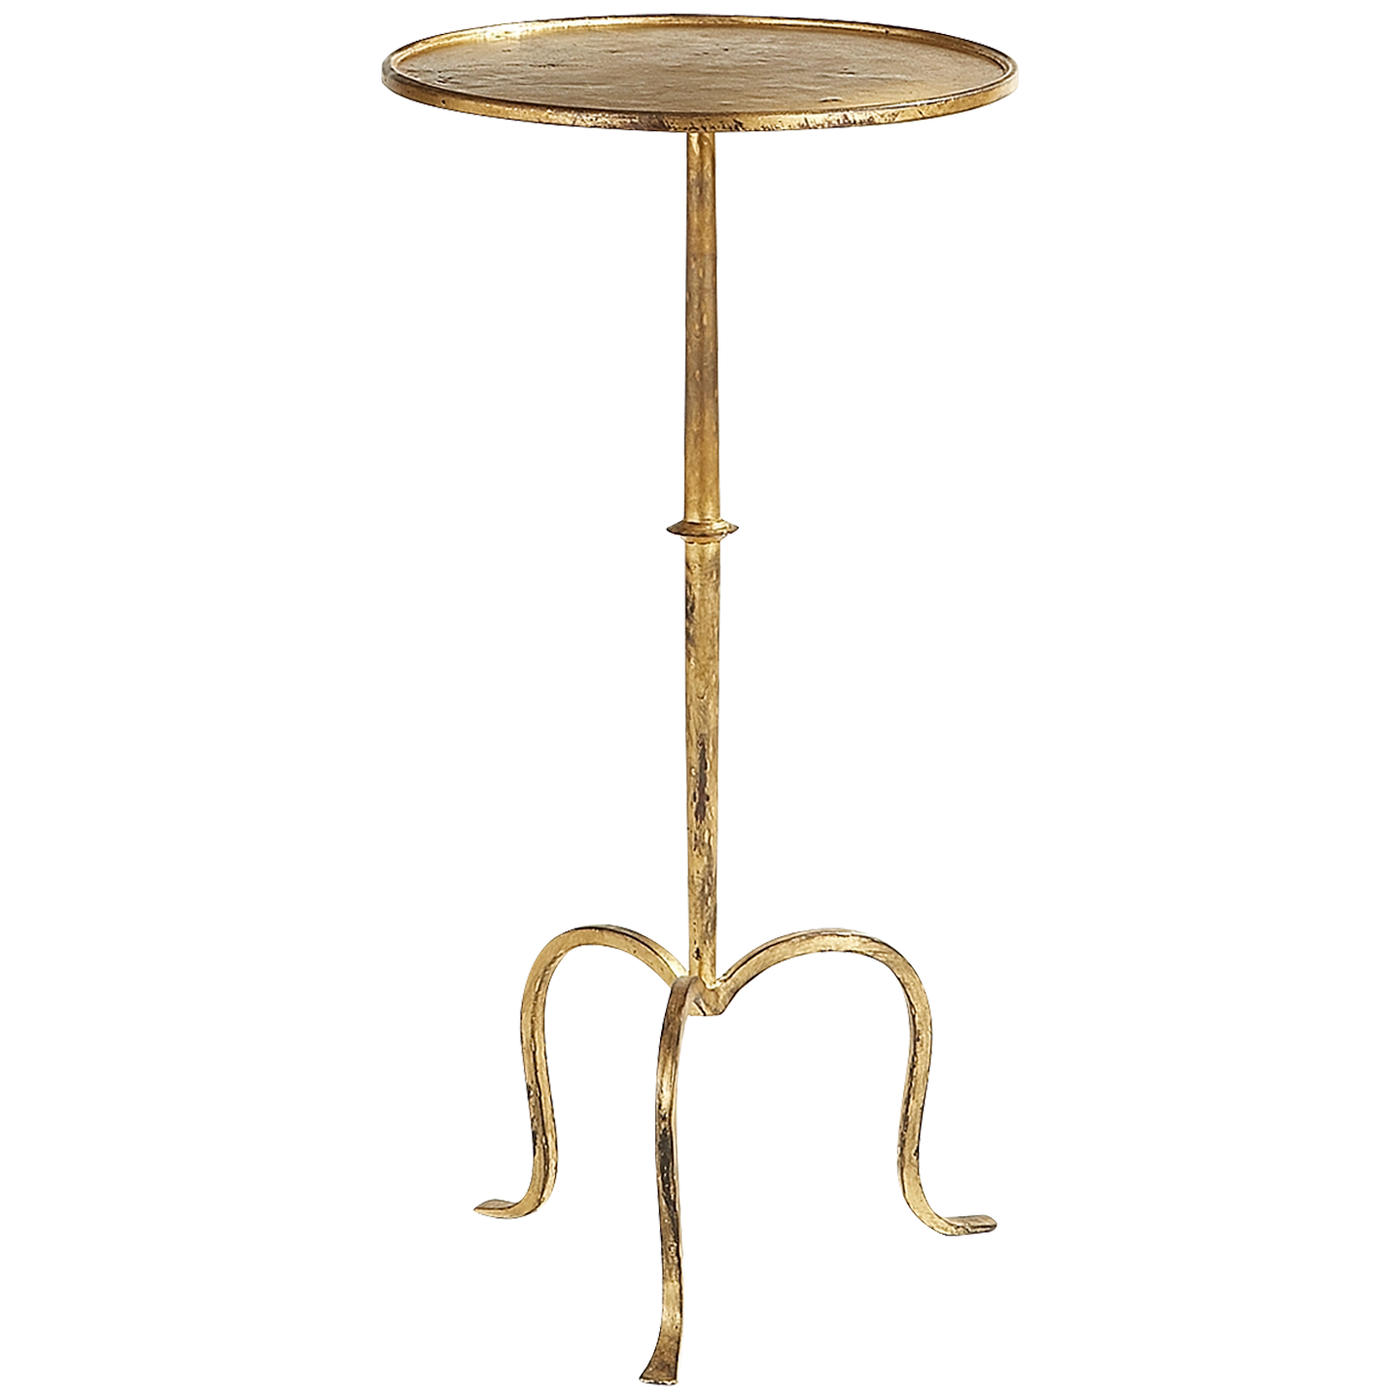 Hand-Forged Iron Drinks Table  | Newport Lamp And Shade | Located in Newport, RI